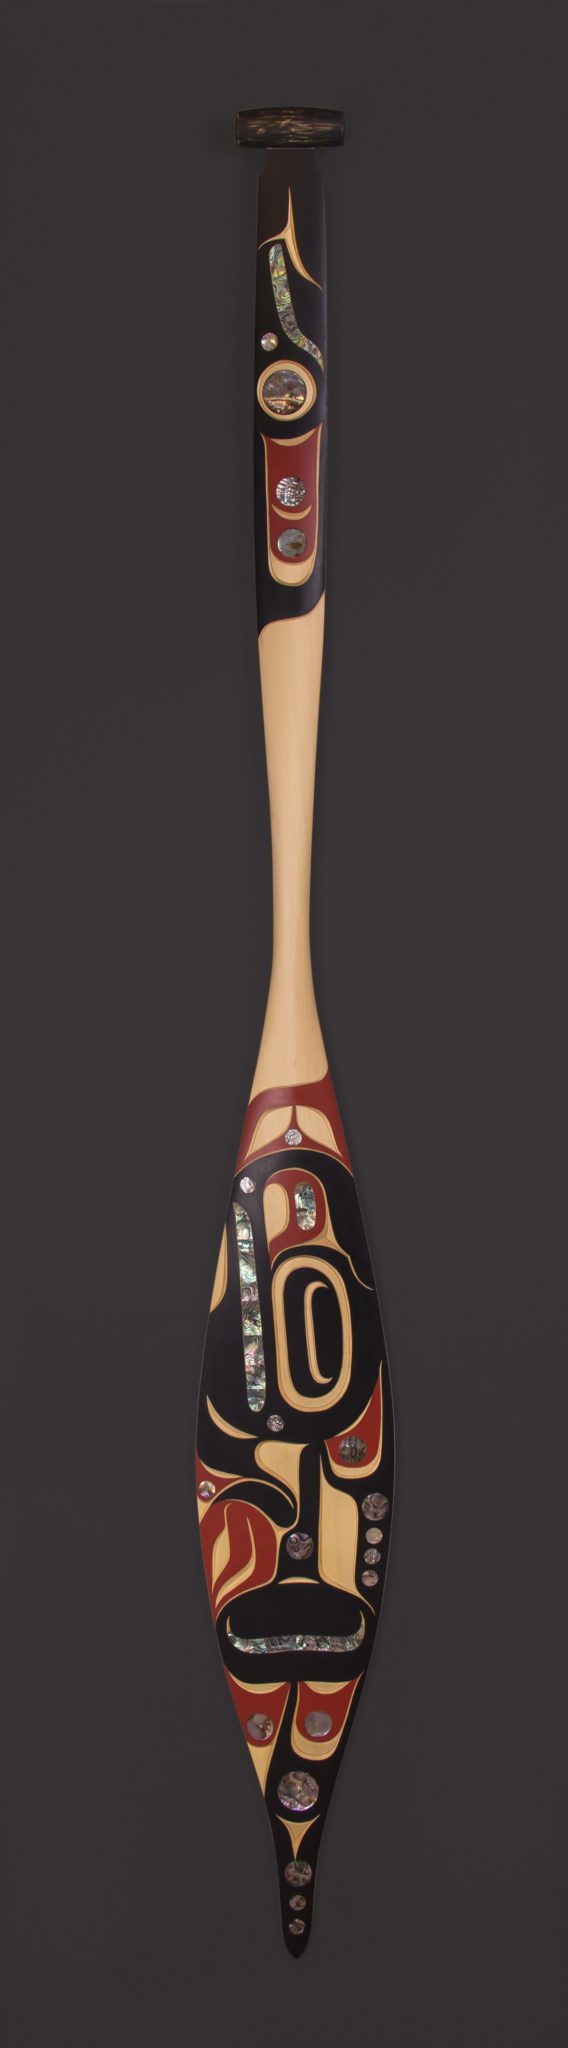 Red Raven Paddle Moy Sutherland Nuuchanulth Yellow cedar, abalone, paint 5" x 7" x 1" Sold